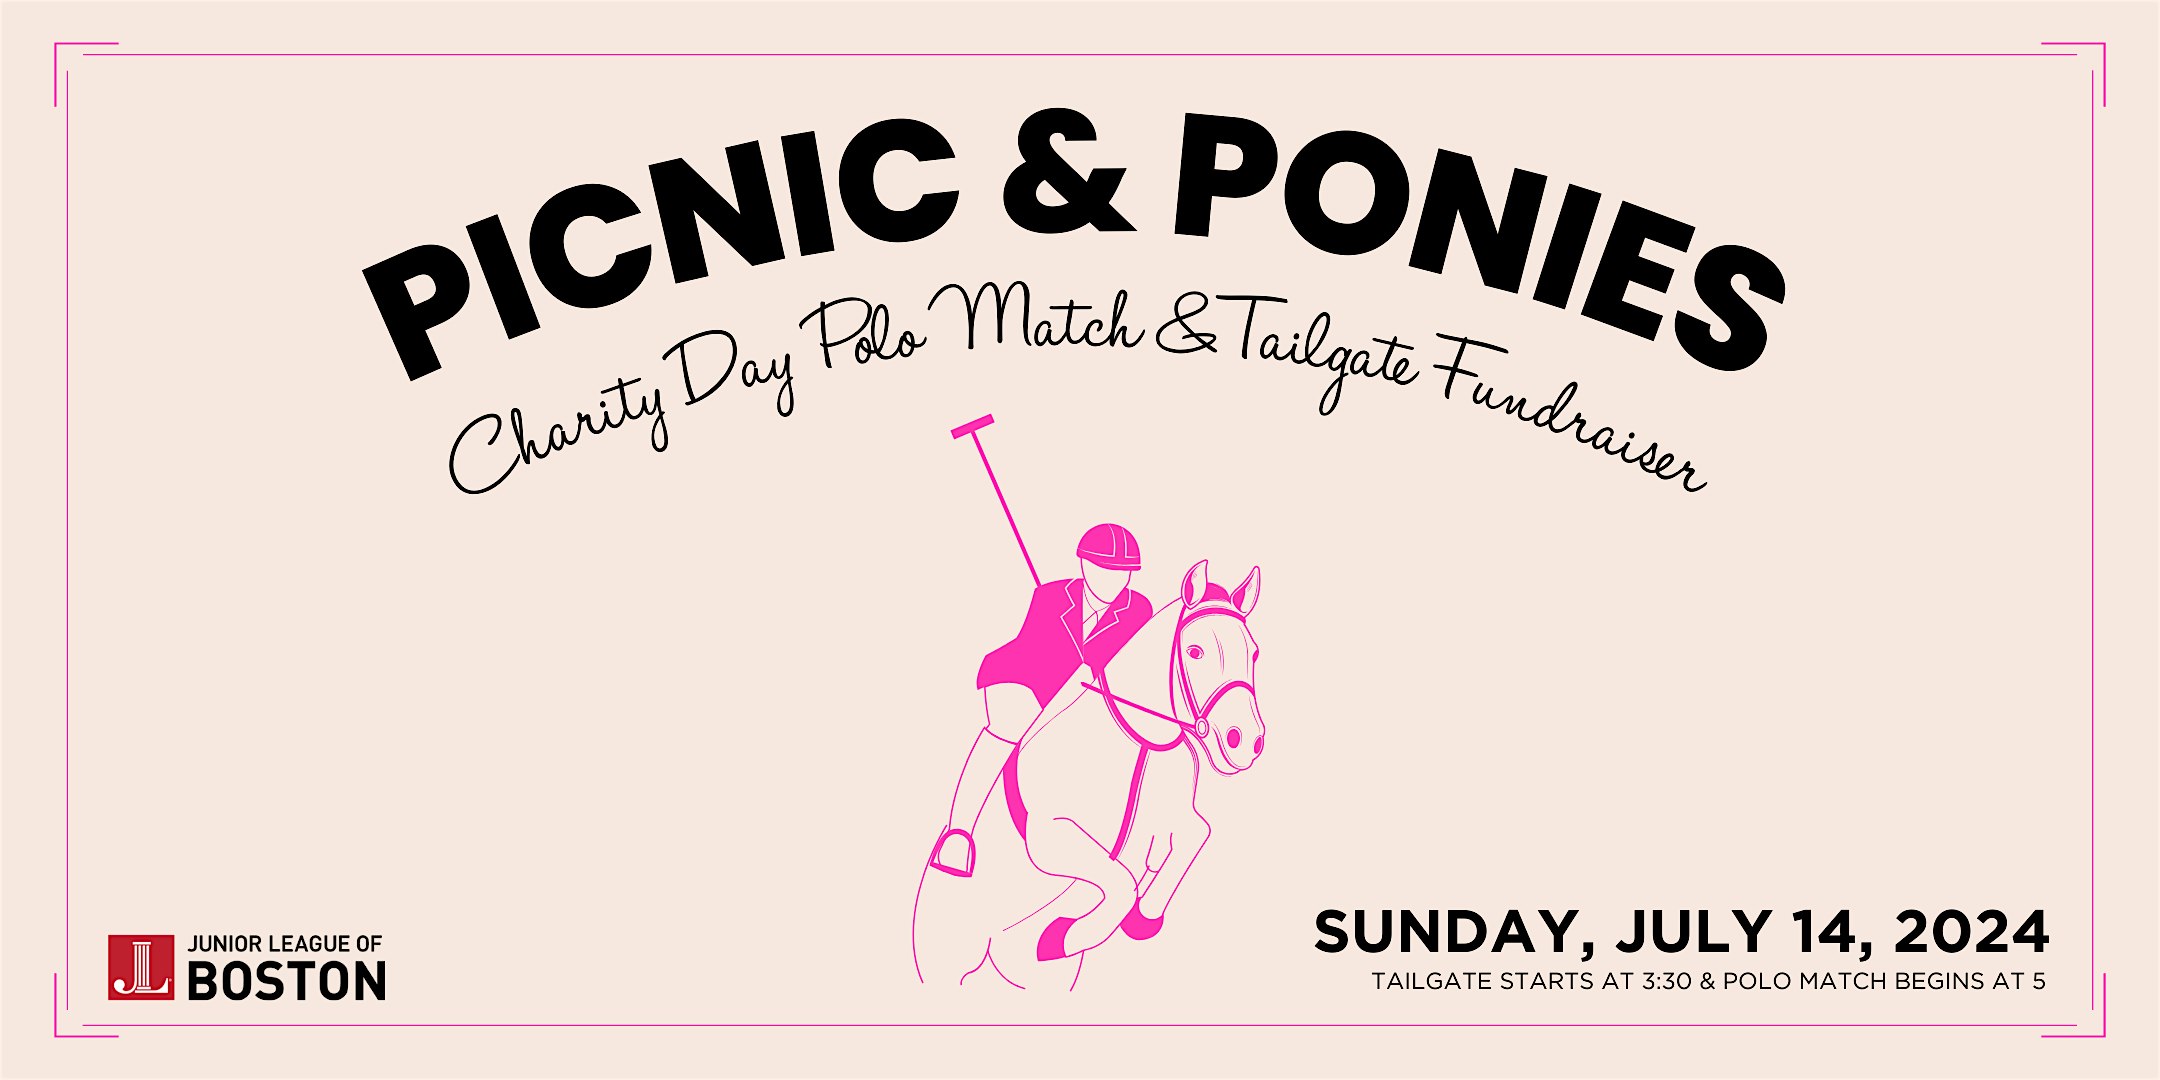 Picnic & Ponies Charity Day Polo Match and Tailgate with JL Boston